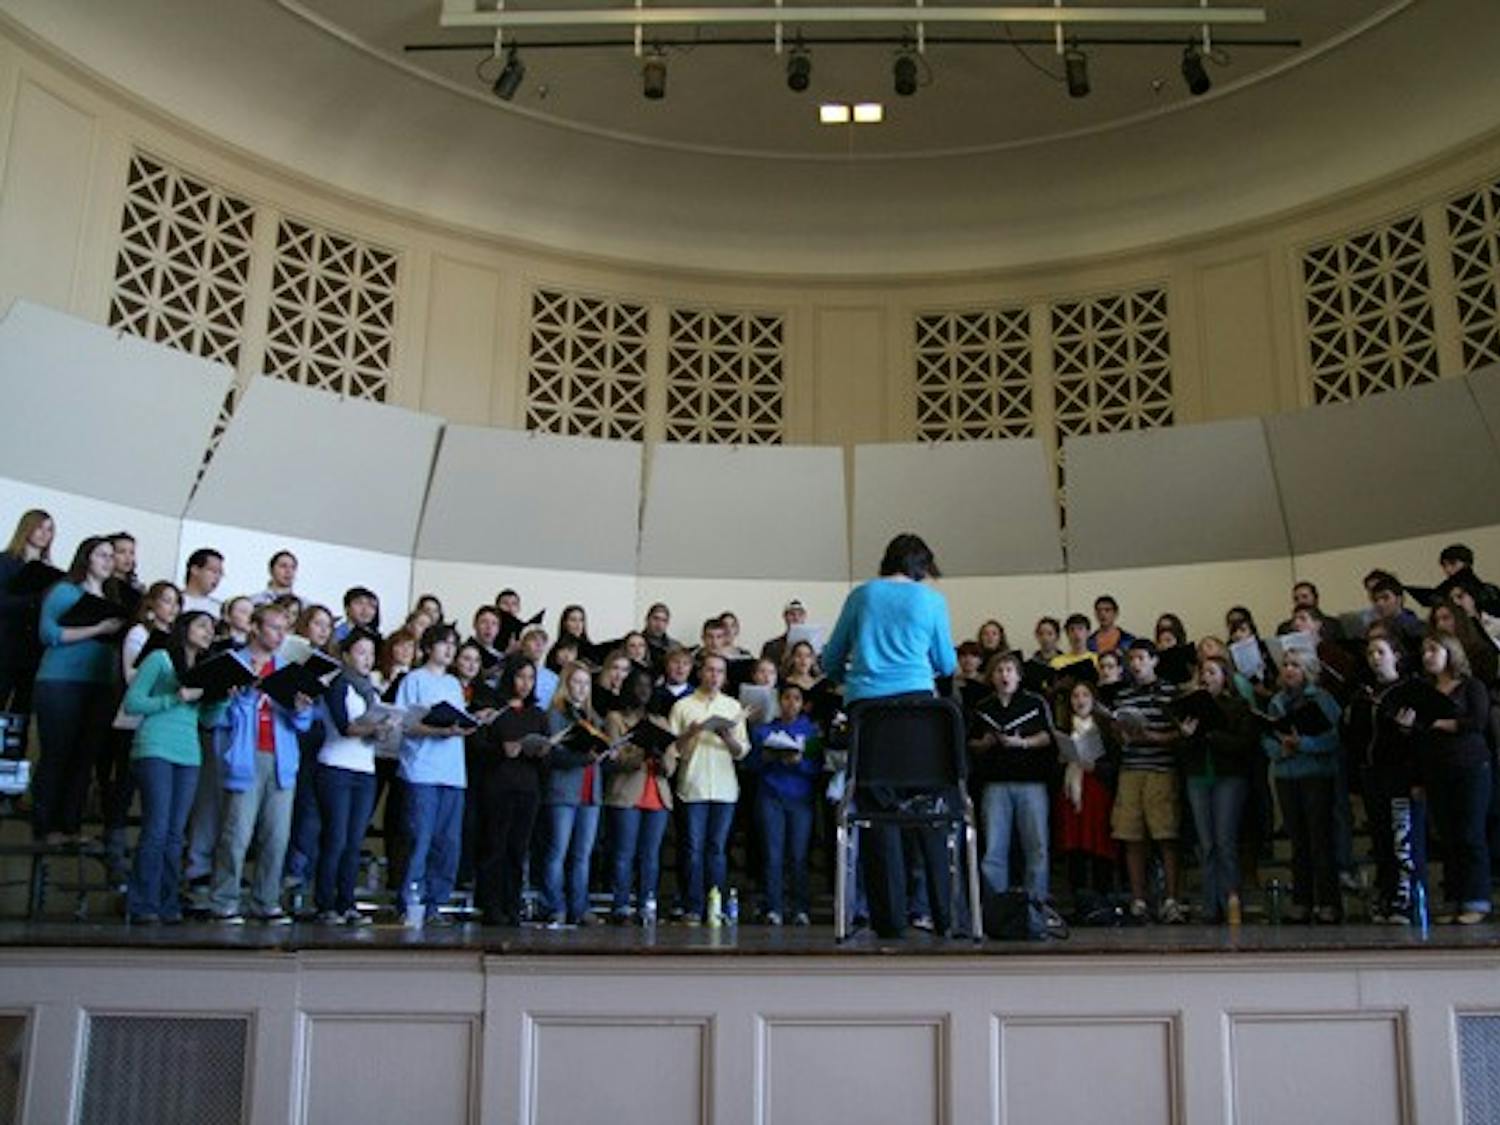 The Carolina Choir will be joined by other campus groups to perform “Carmina Burana” tonight. DTH/BJ Dworak